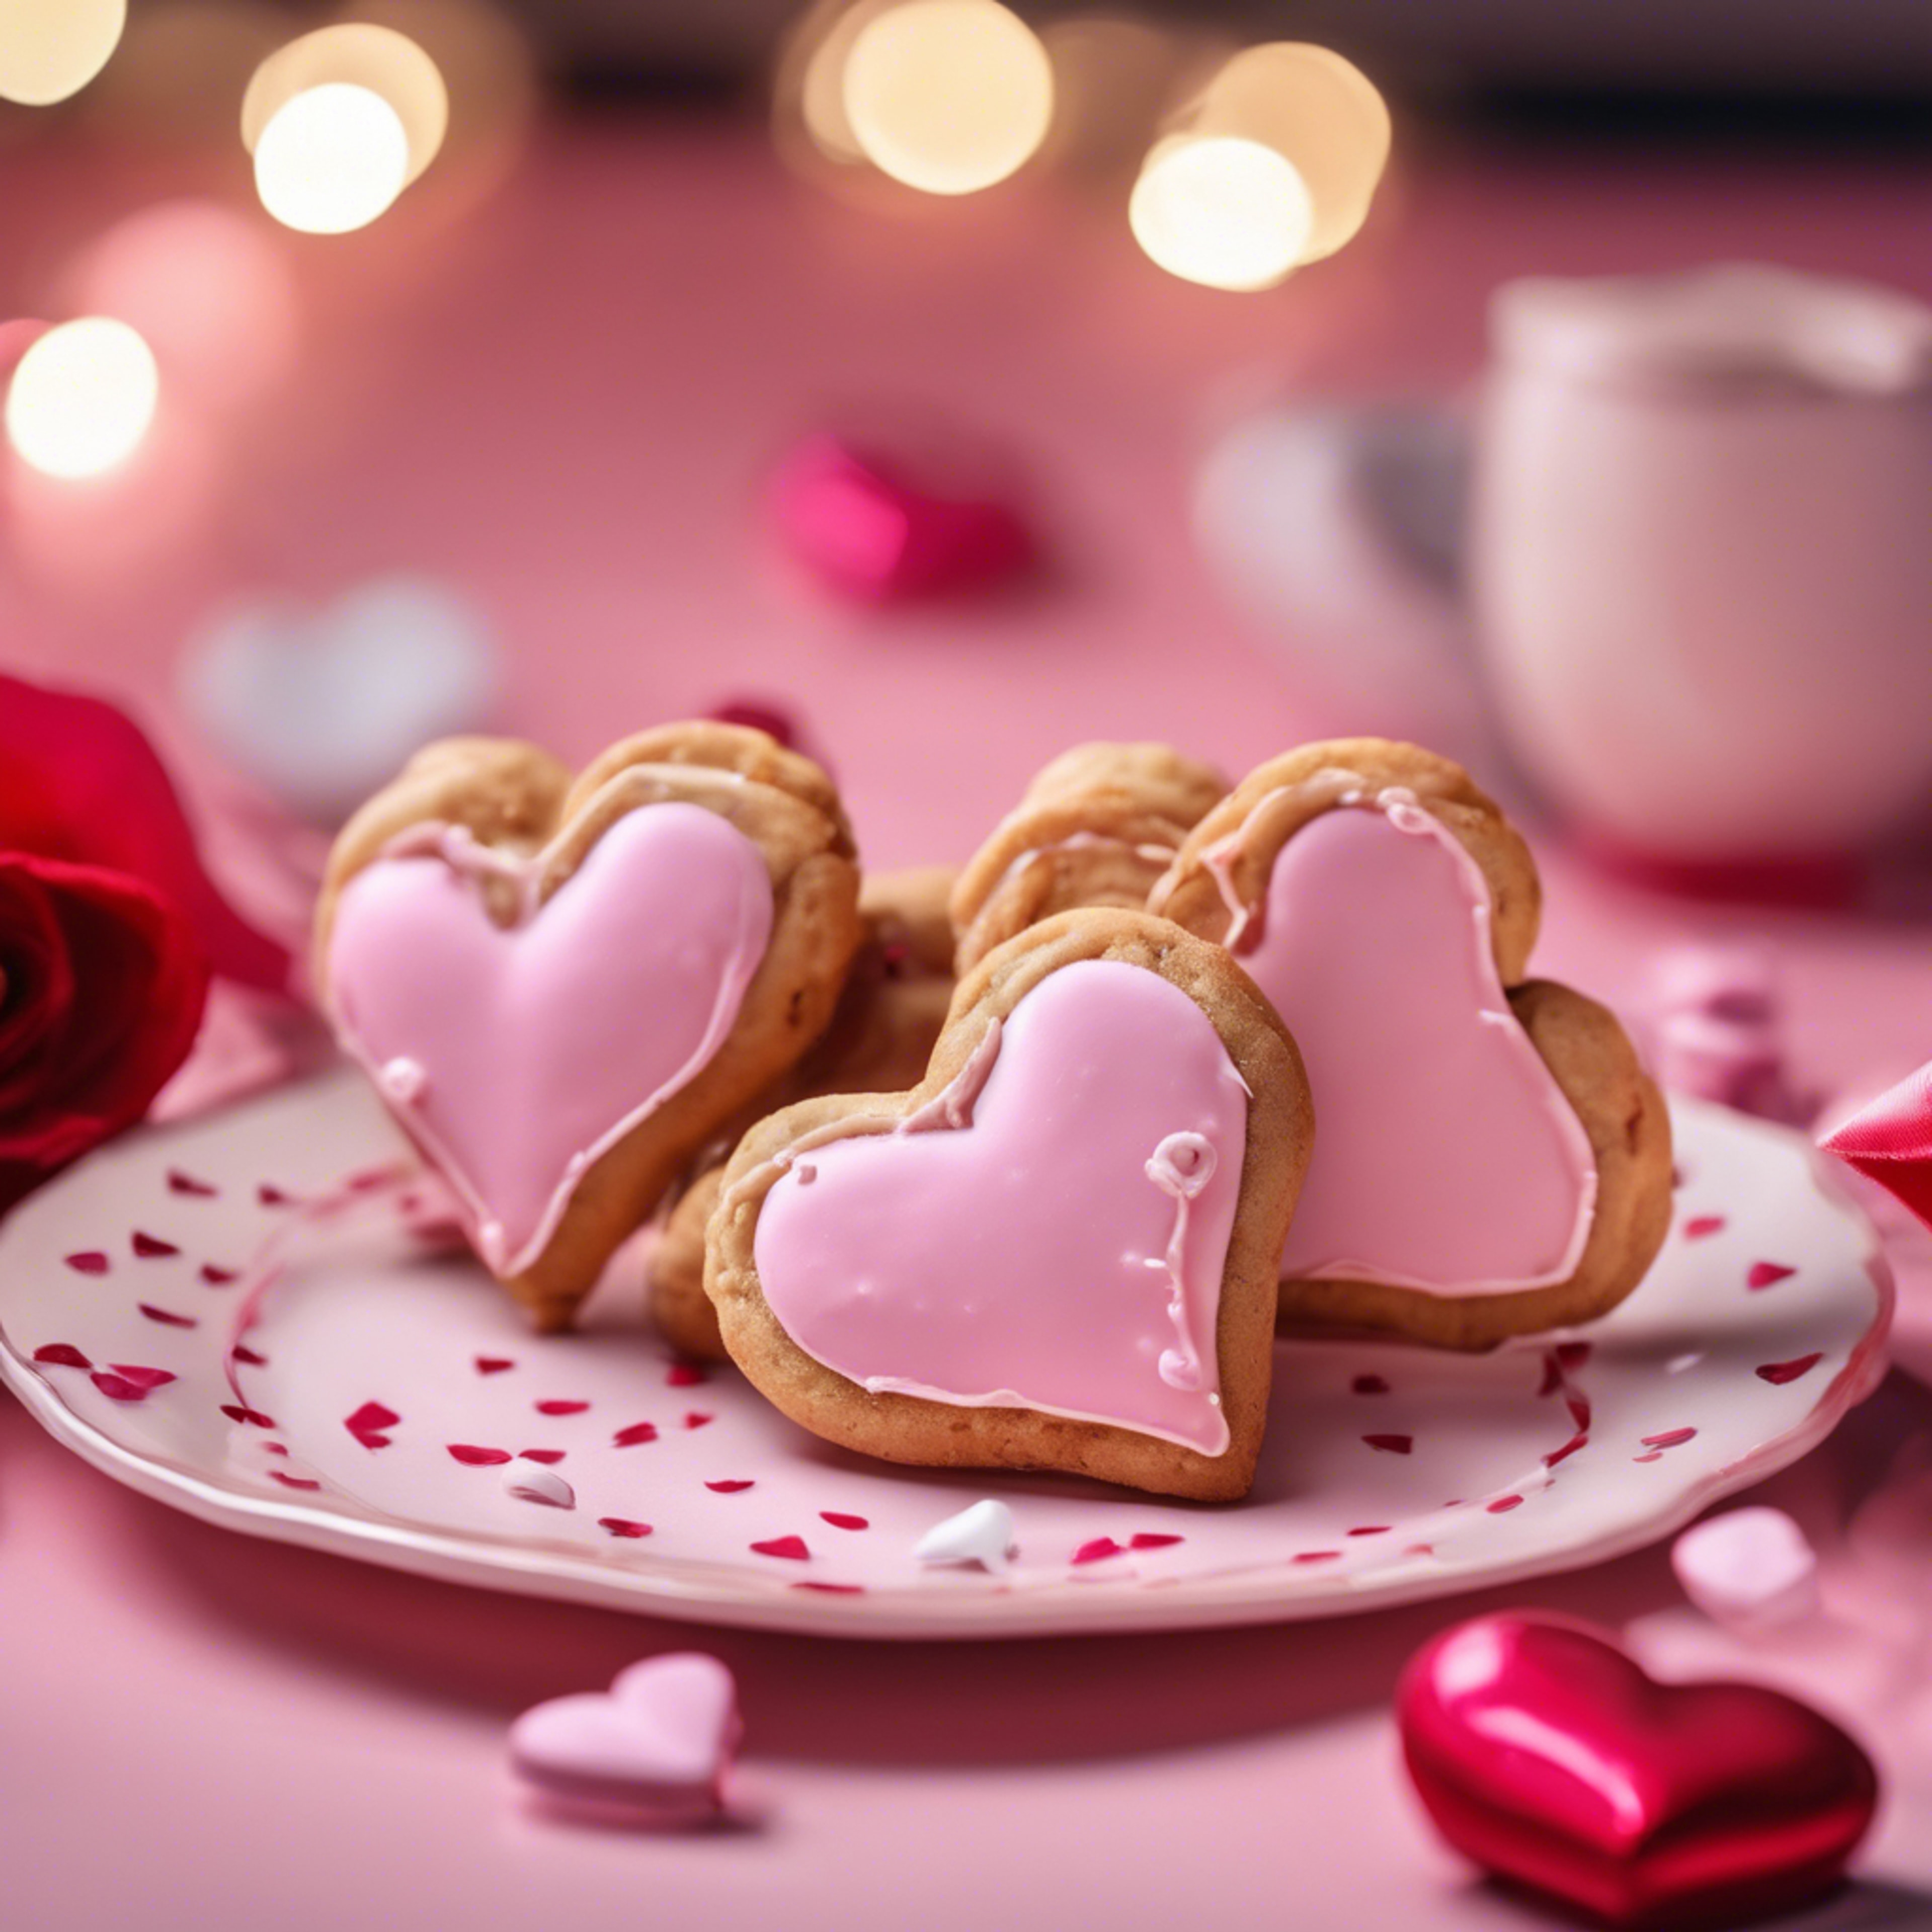 A pair of heart-shaped frosted cookies on a vibrant Valentine's day setting. Ფონი[699c1bd667c44183af85]